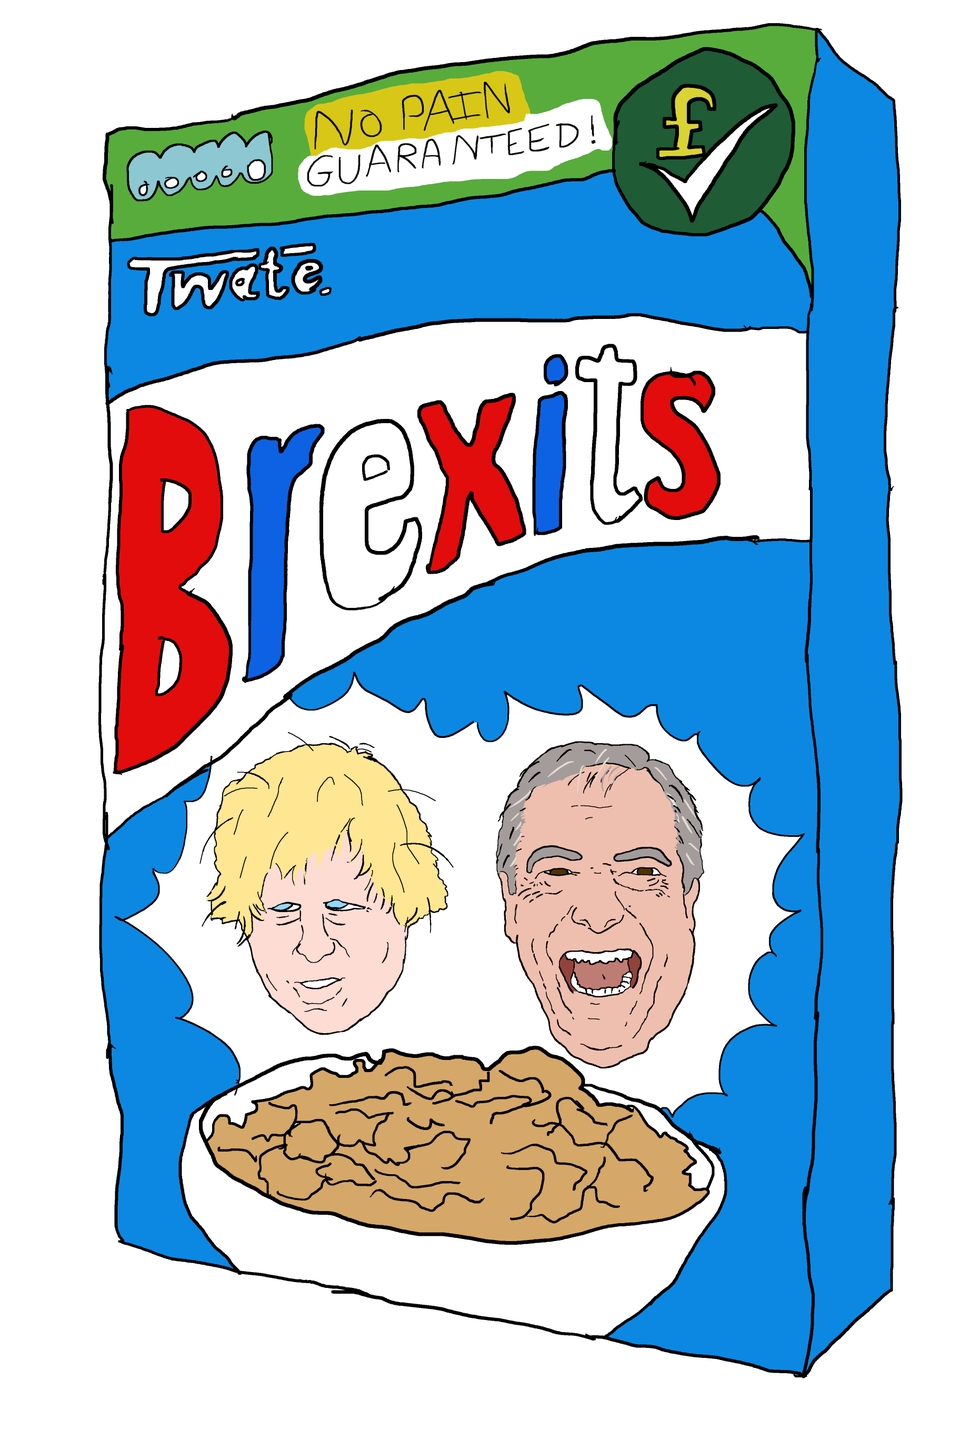 Bowl of Brexit